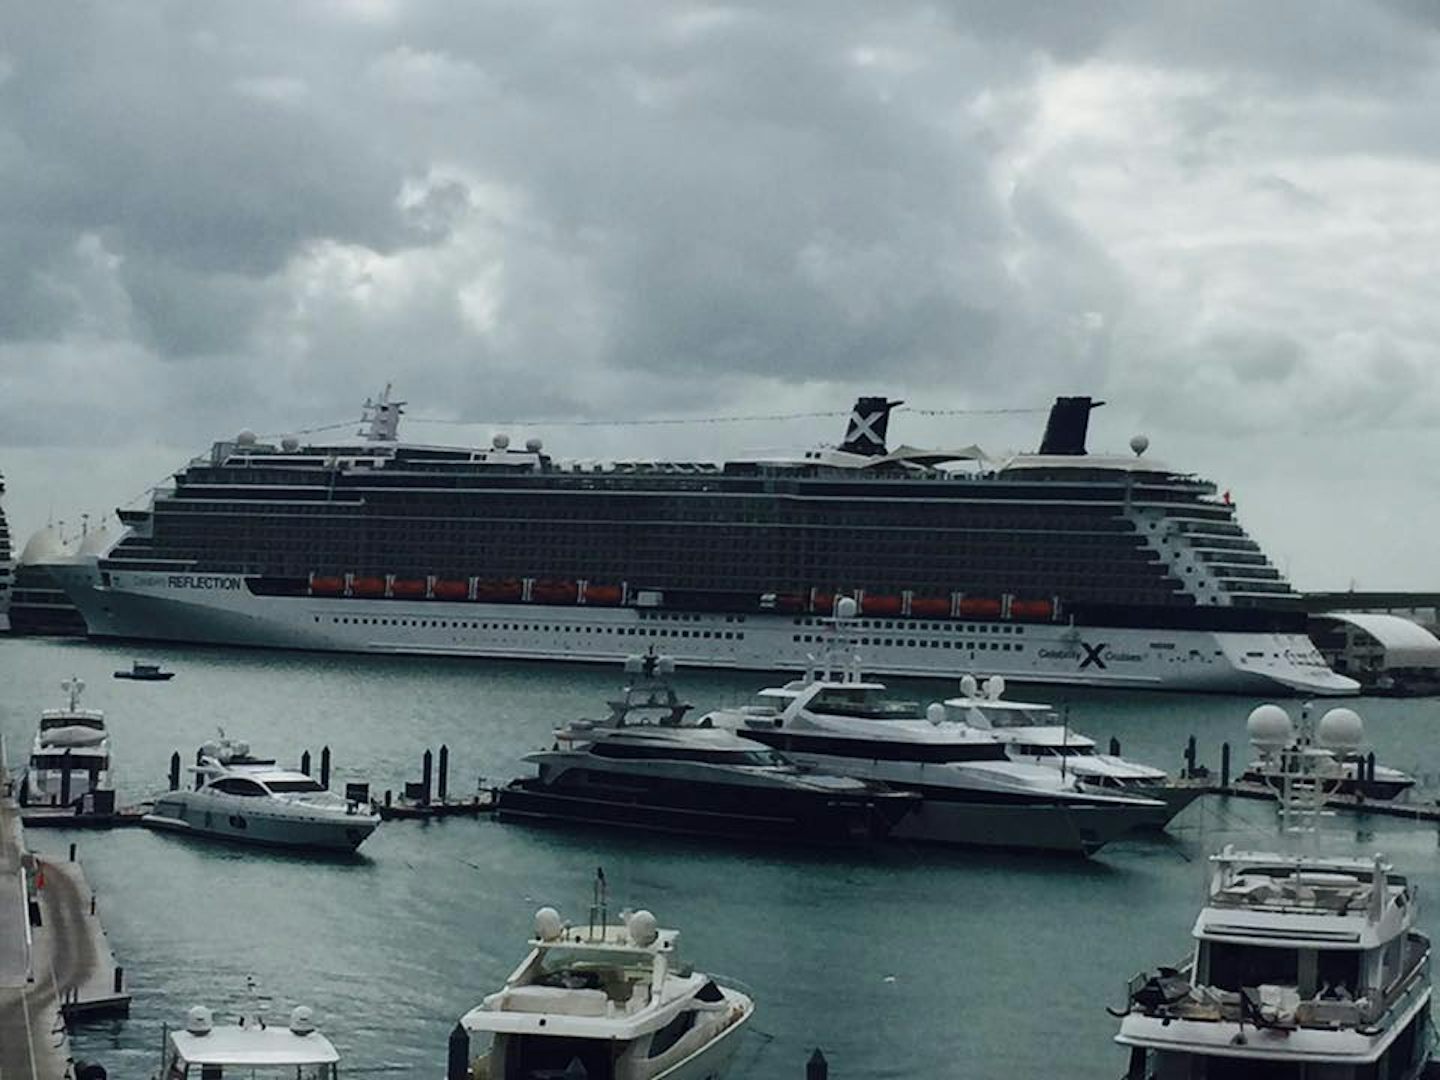 Celebrity Reflection at pier in Miami